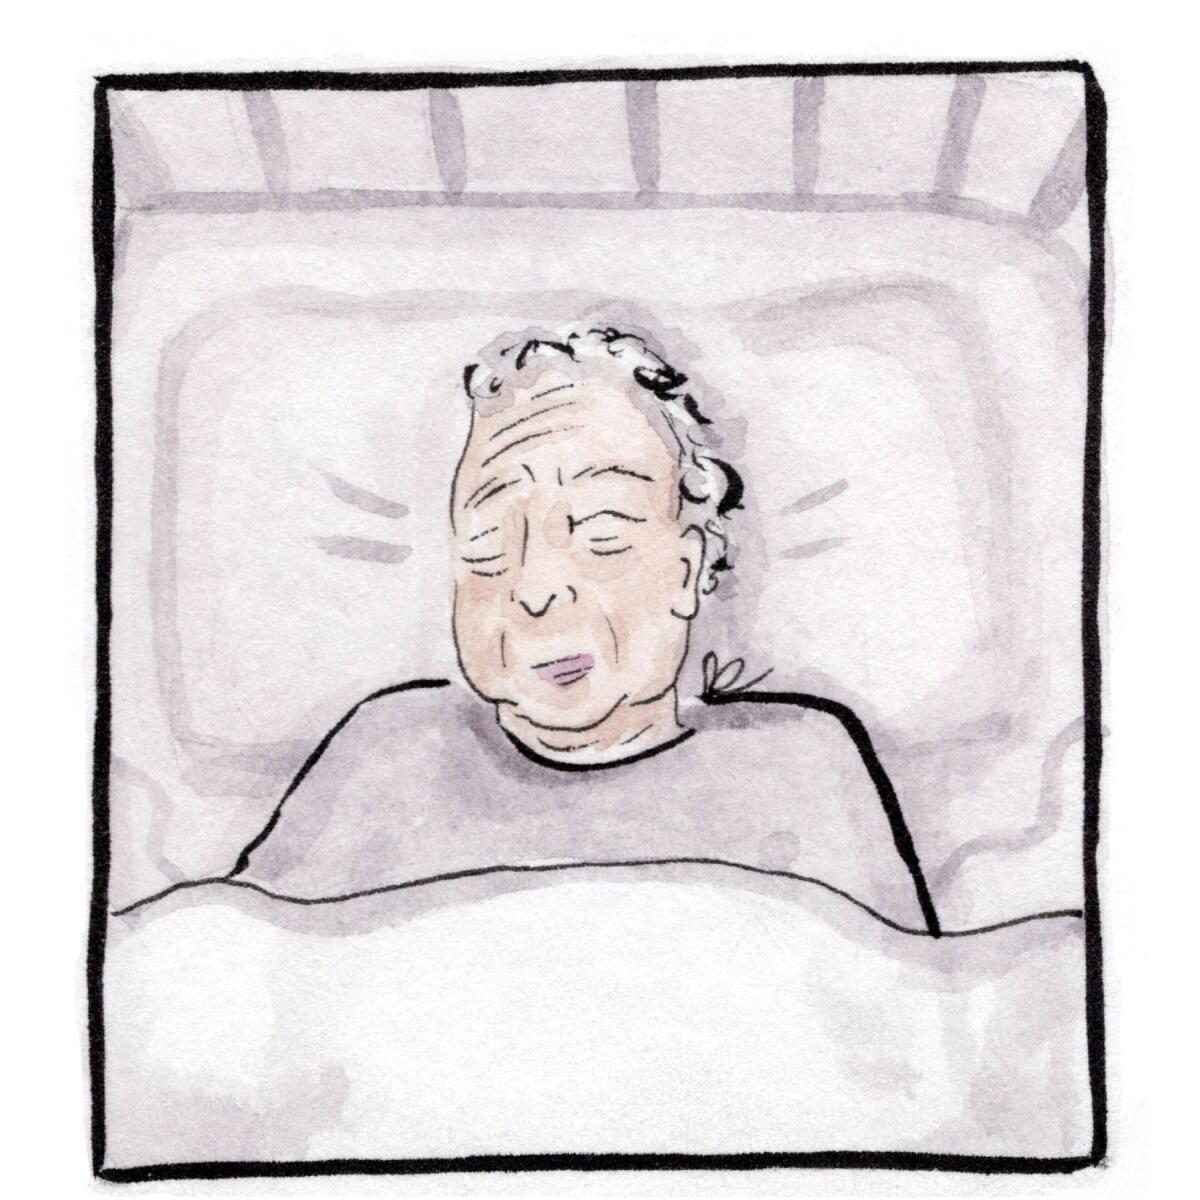 An elderly woman lies in bed with her eyes closed. No one is speaking.